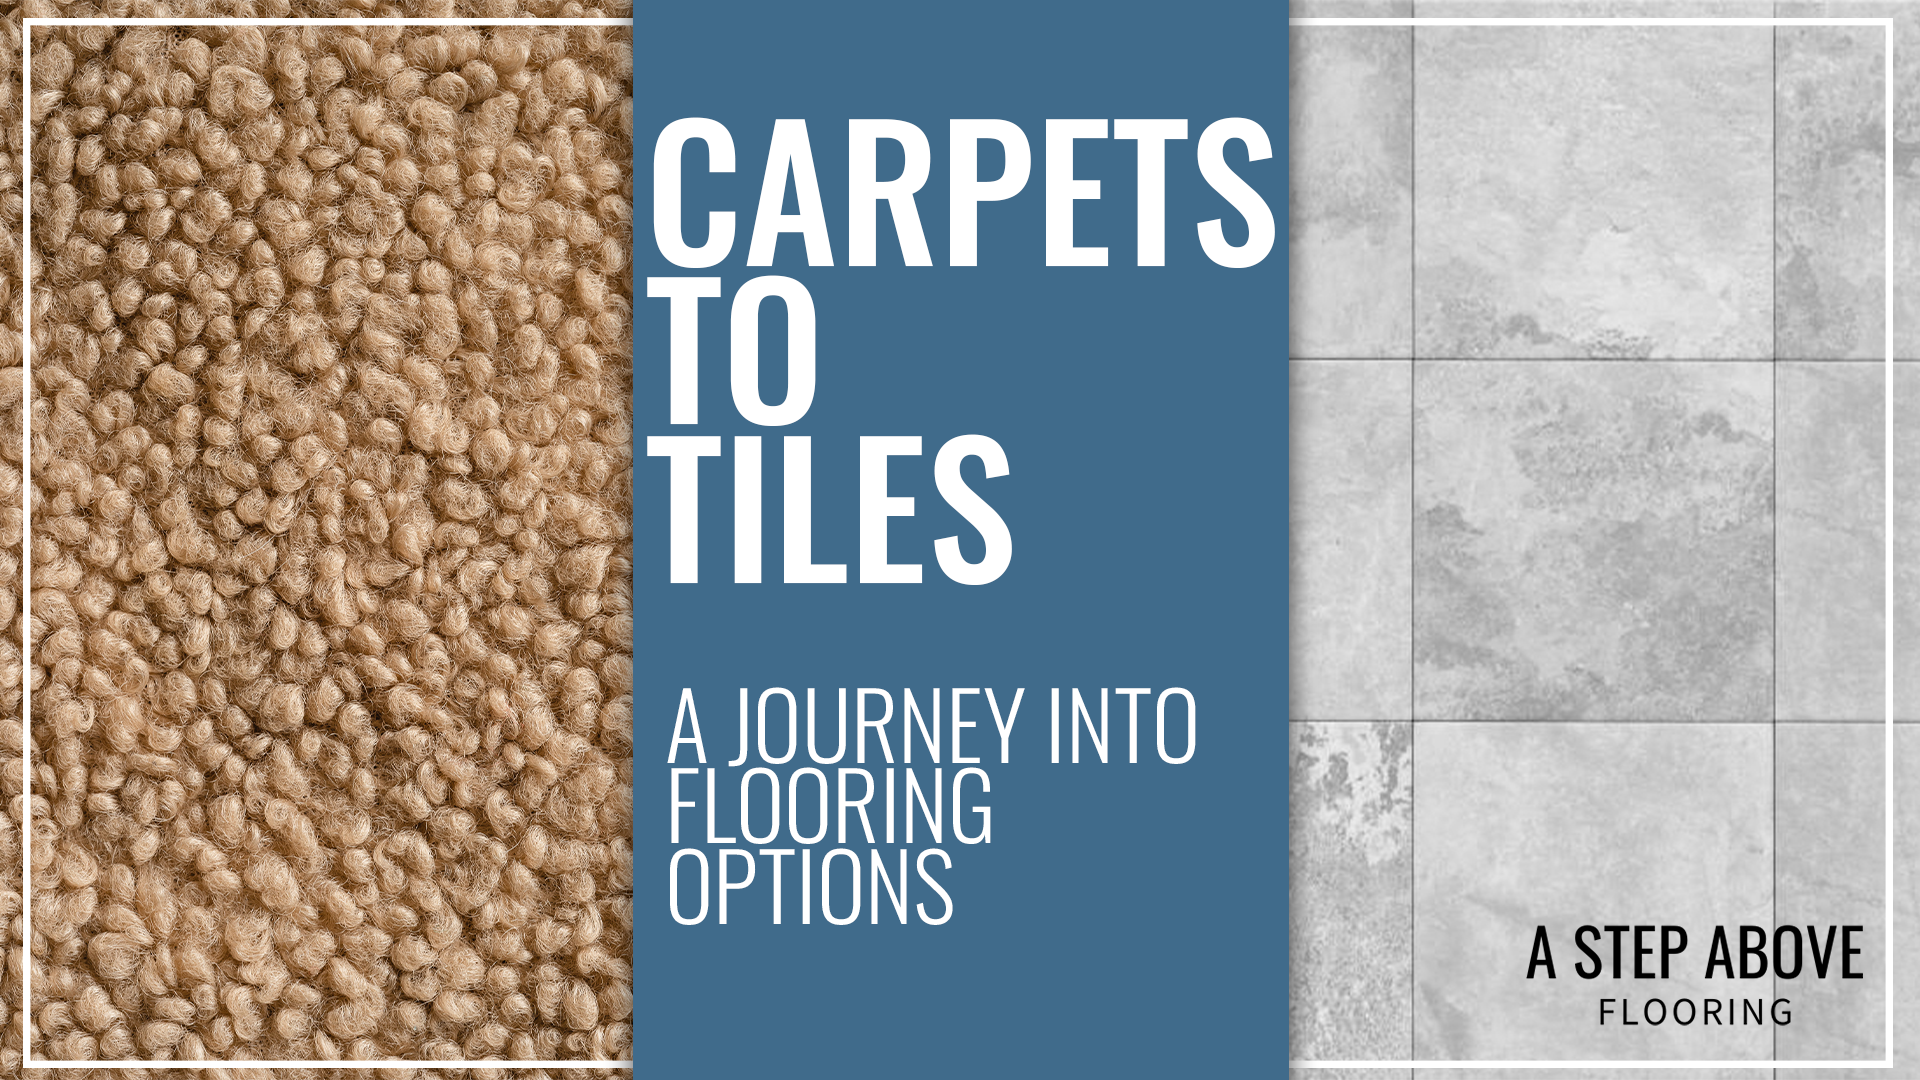 Tan carpet and gray tiles with the text "Carpets to Tiles: A Journey into Flooring Options"